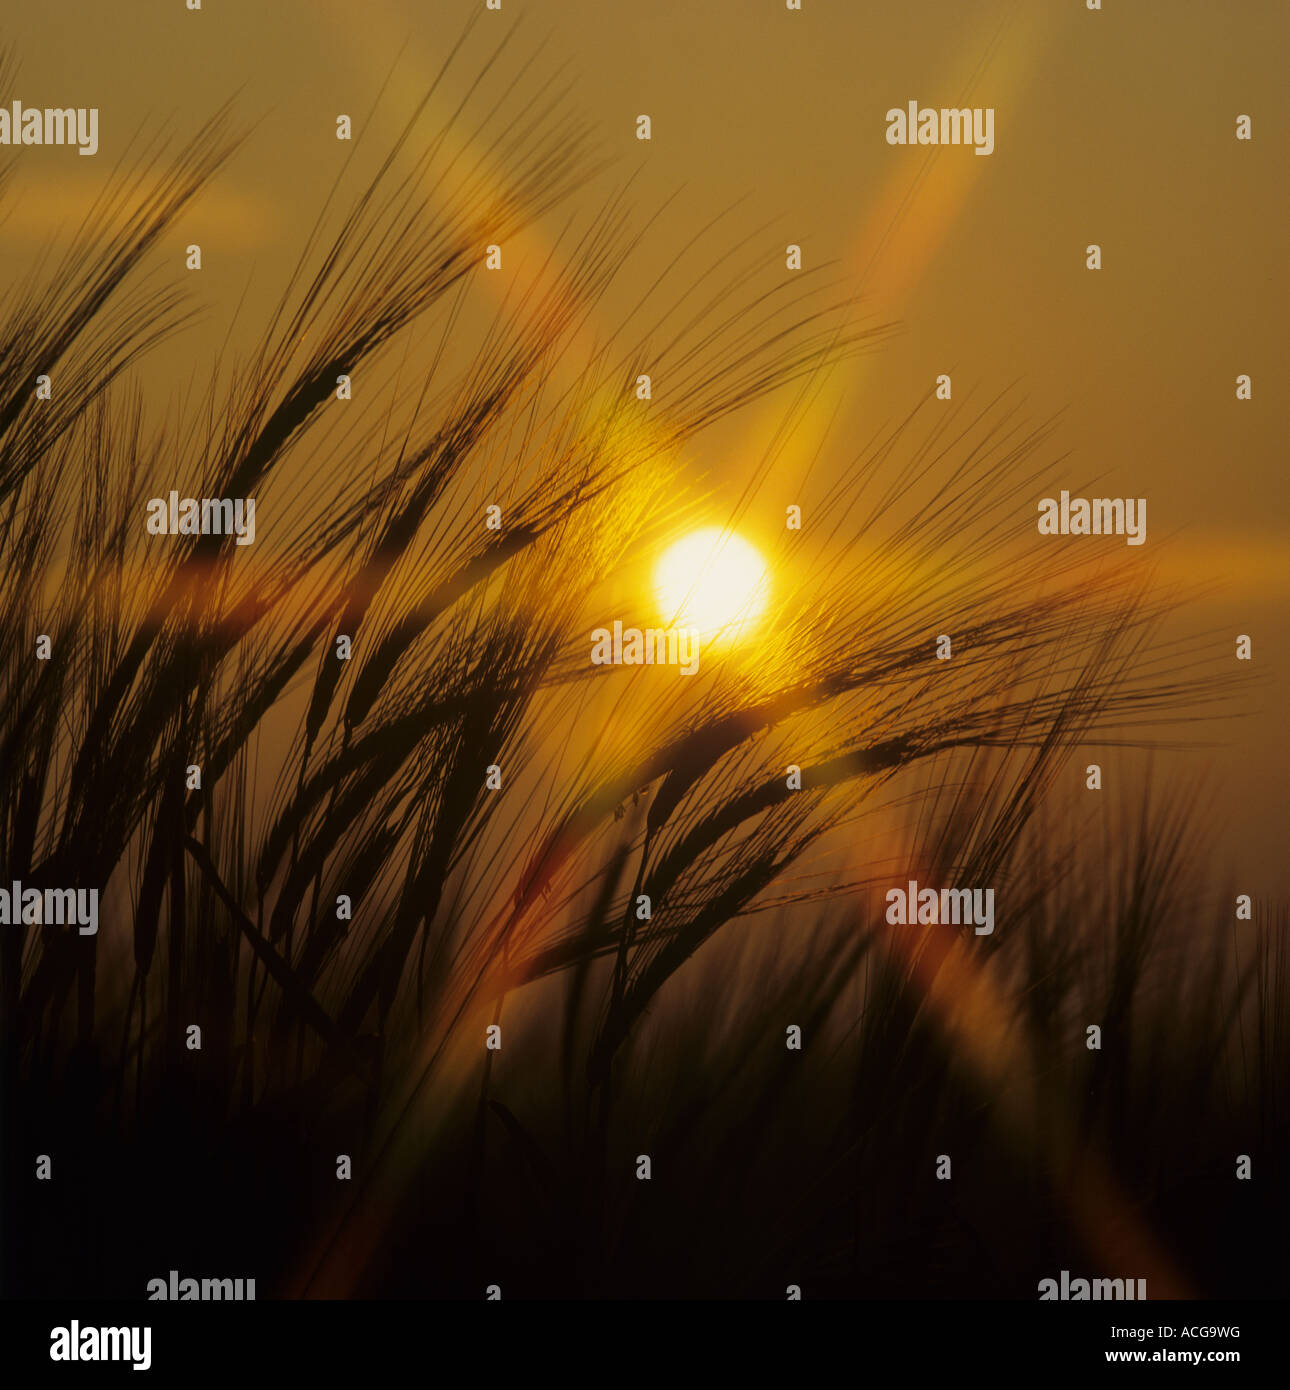 Barley ears silouetted against the red setting sun Stock Photo